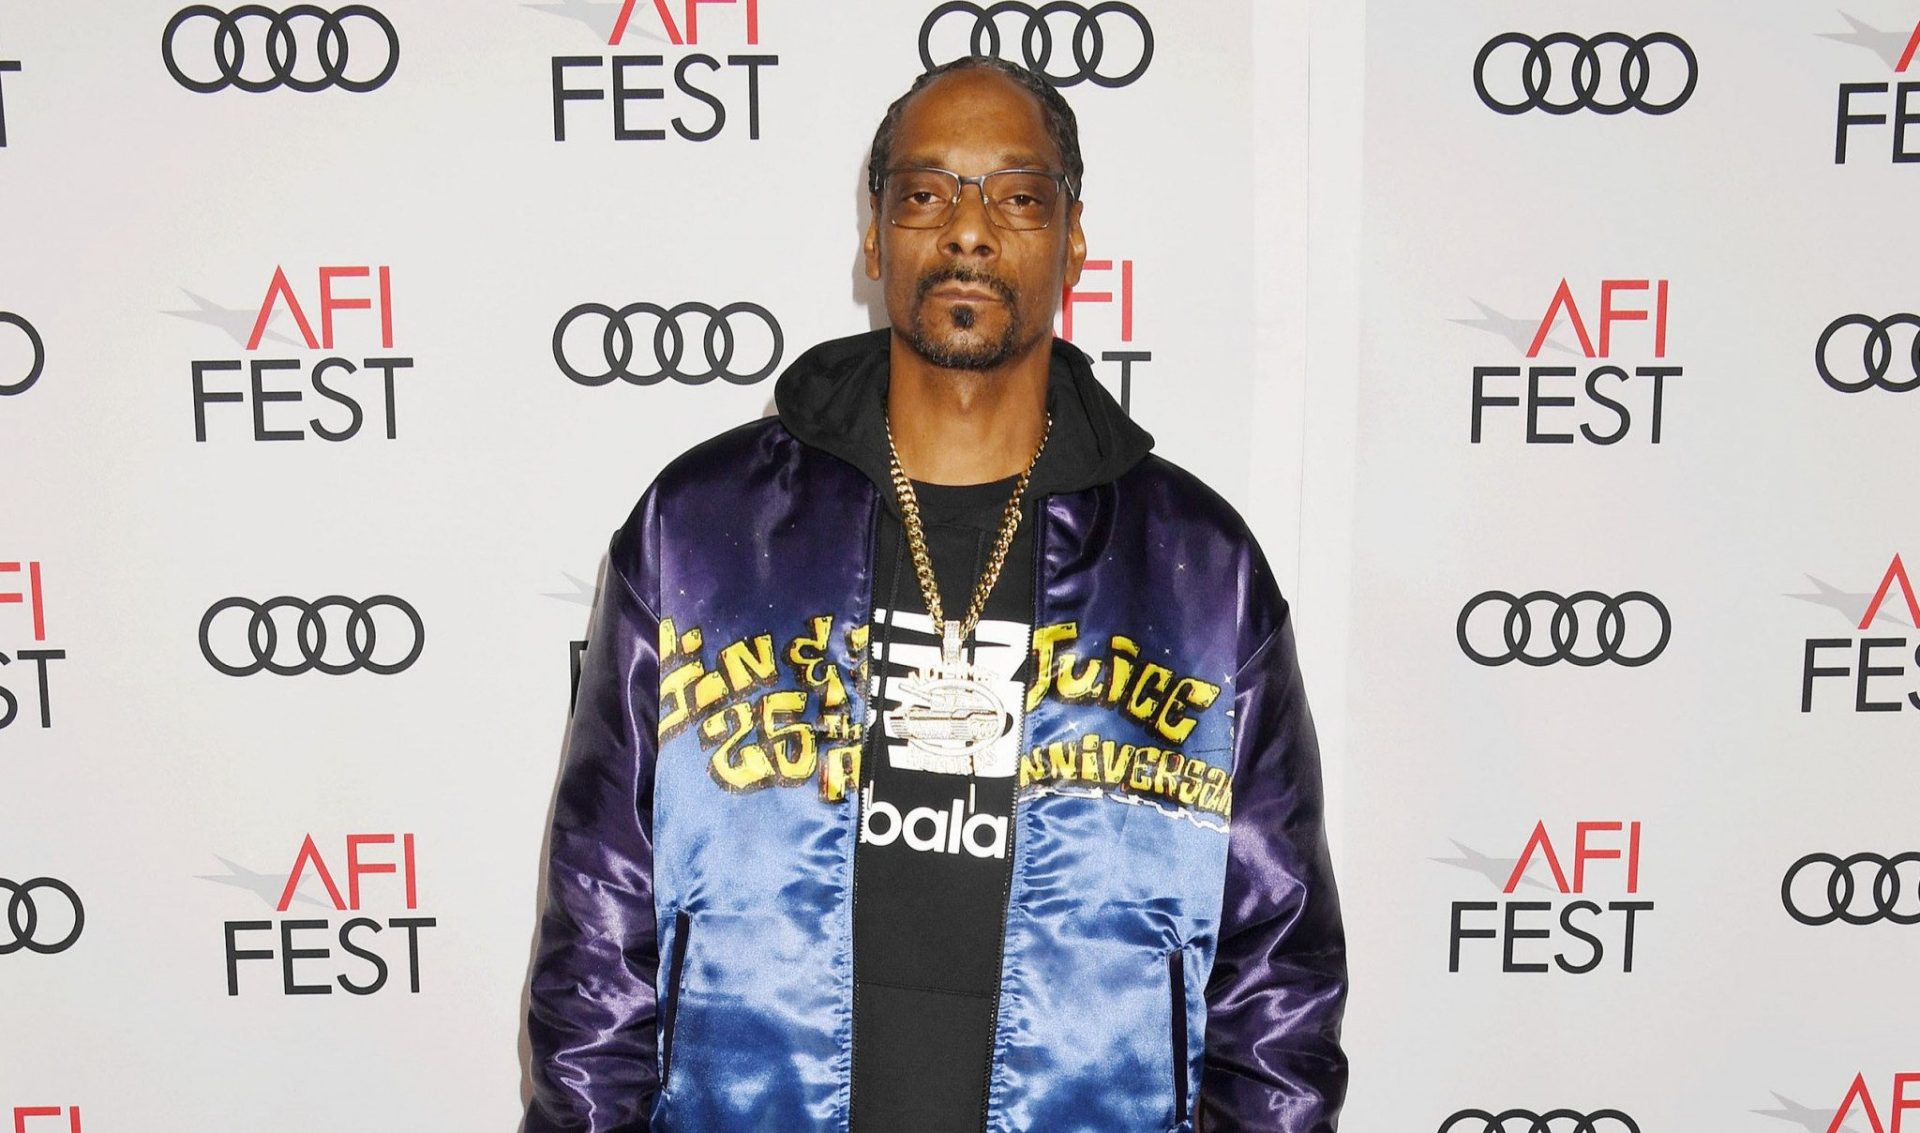 Snoop Dogg made a split-second decision that changed his life